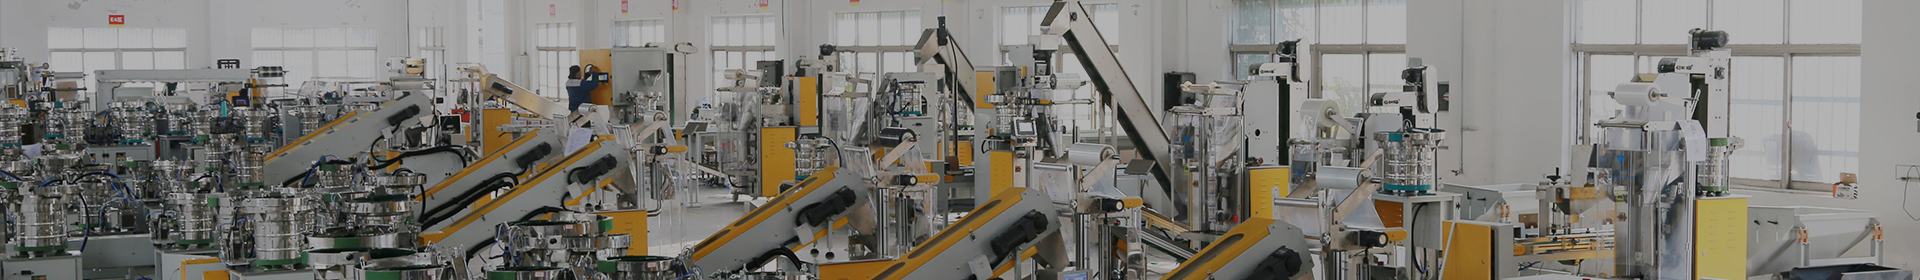 Hardware Packaging Machines - Bringing Efficiency and Reliability to Your Production Line